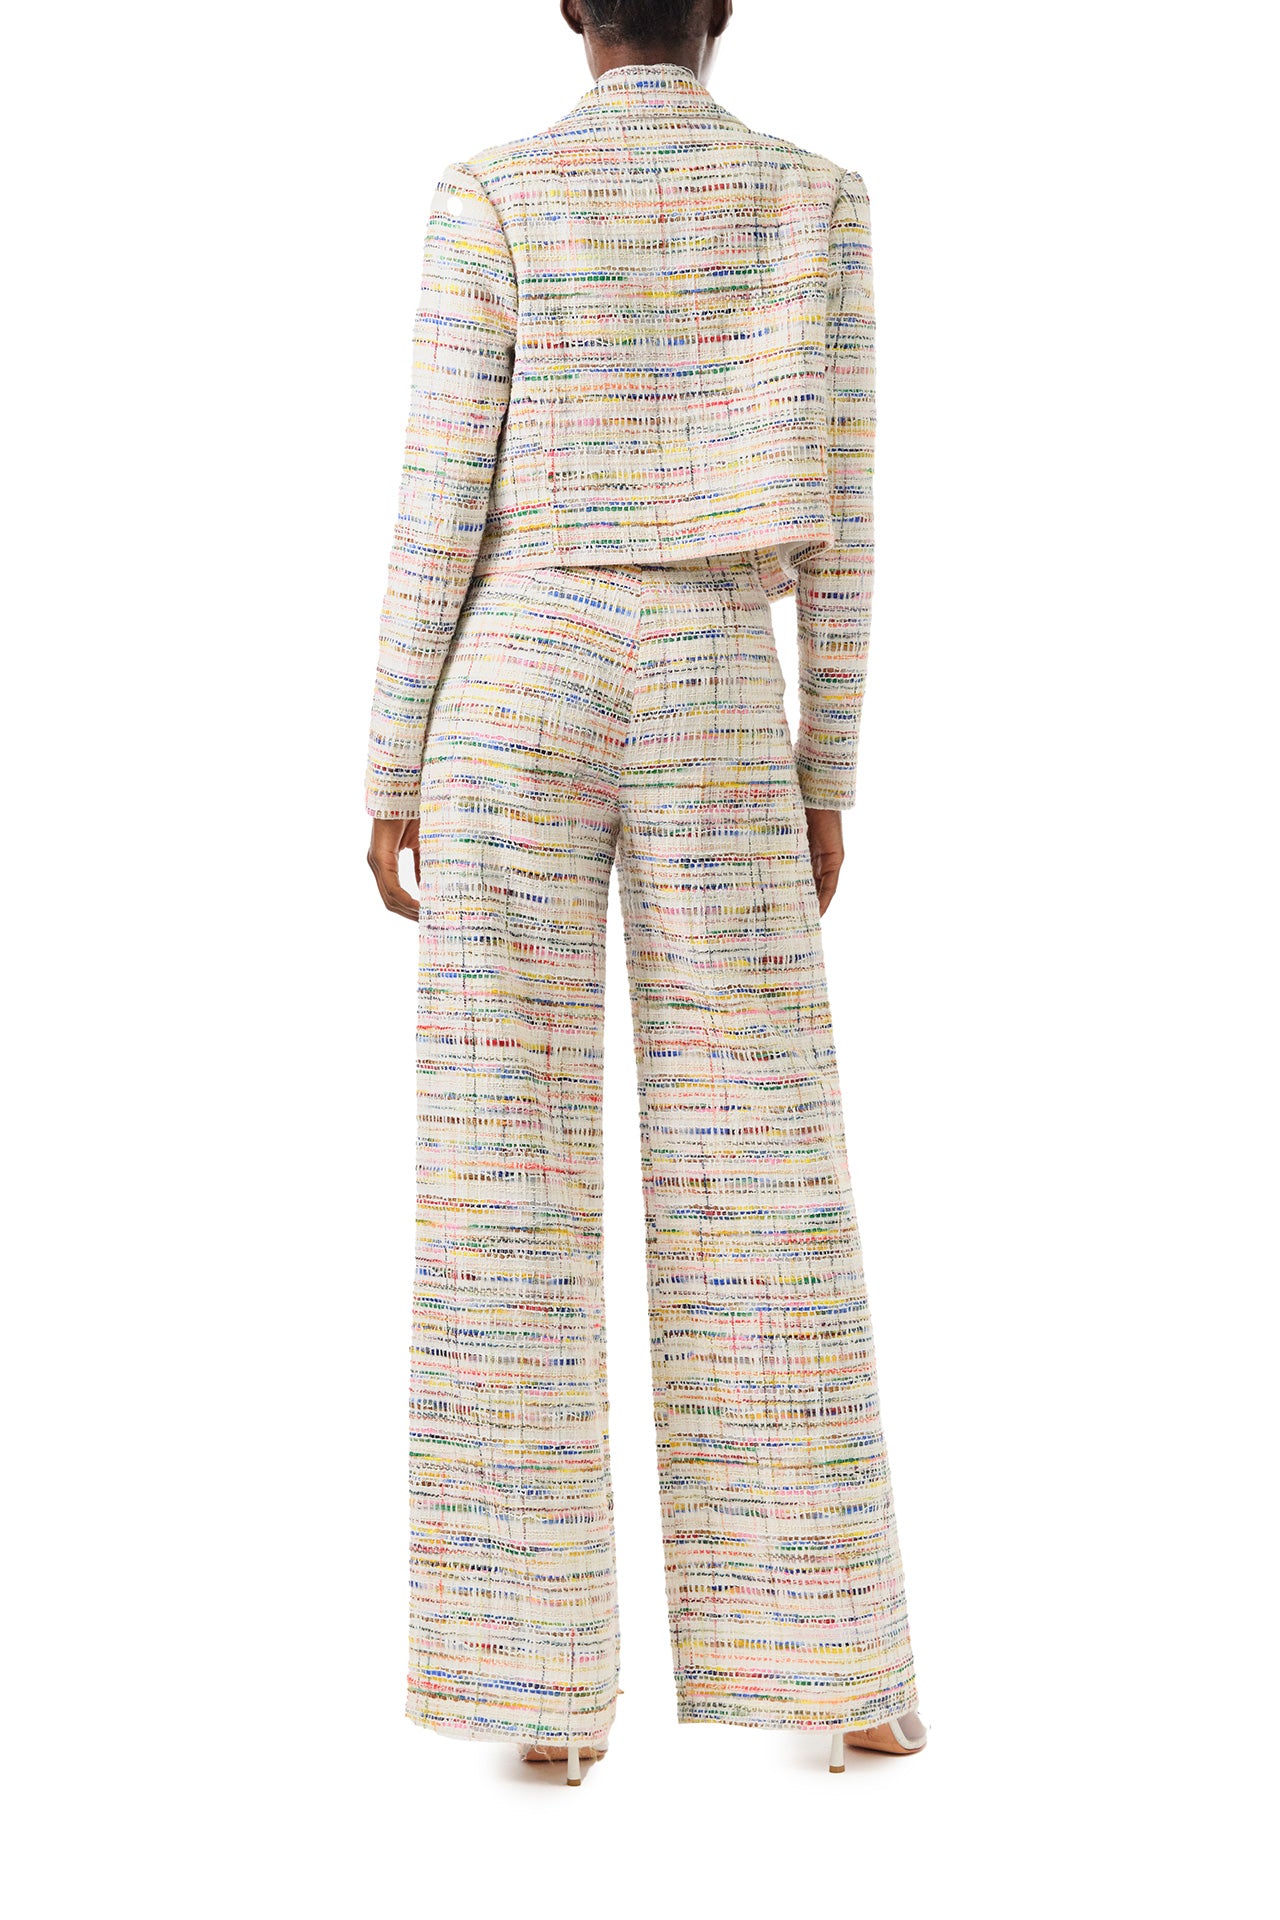 Monique Lhuillier Spring 2024 silk white multi colored tweed cropped jacket shown with high waisted trousers - back.